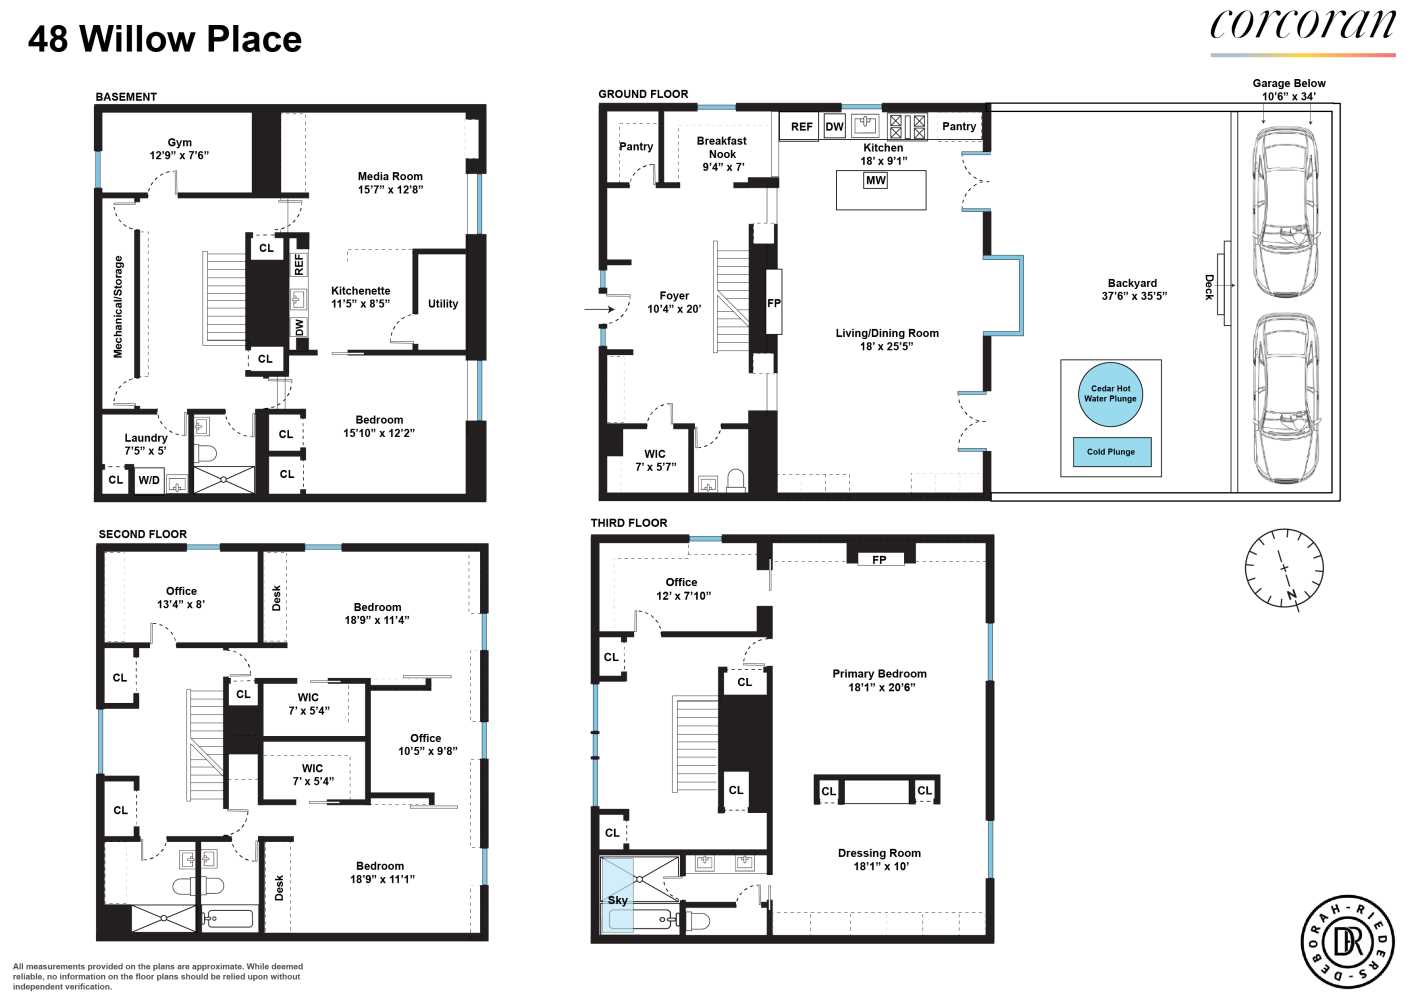 Floorplan for 48 Willow Place